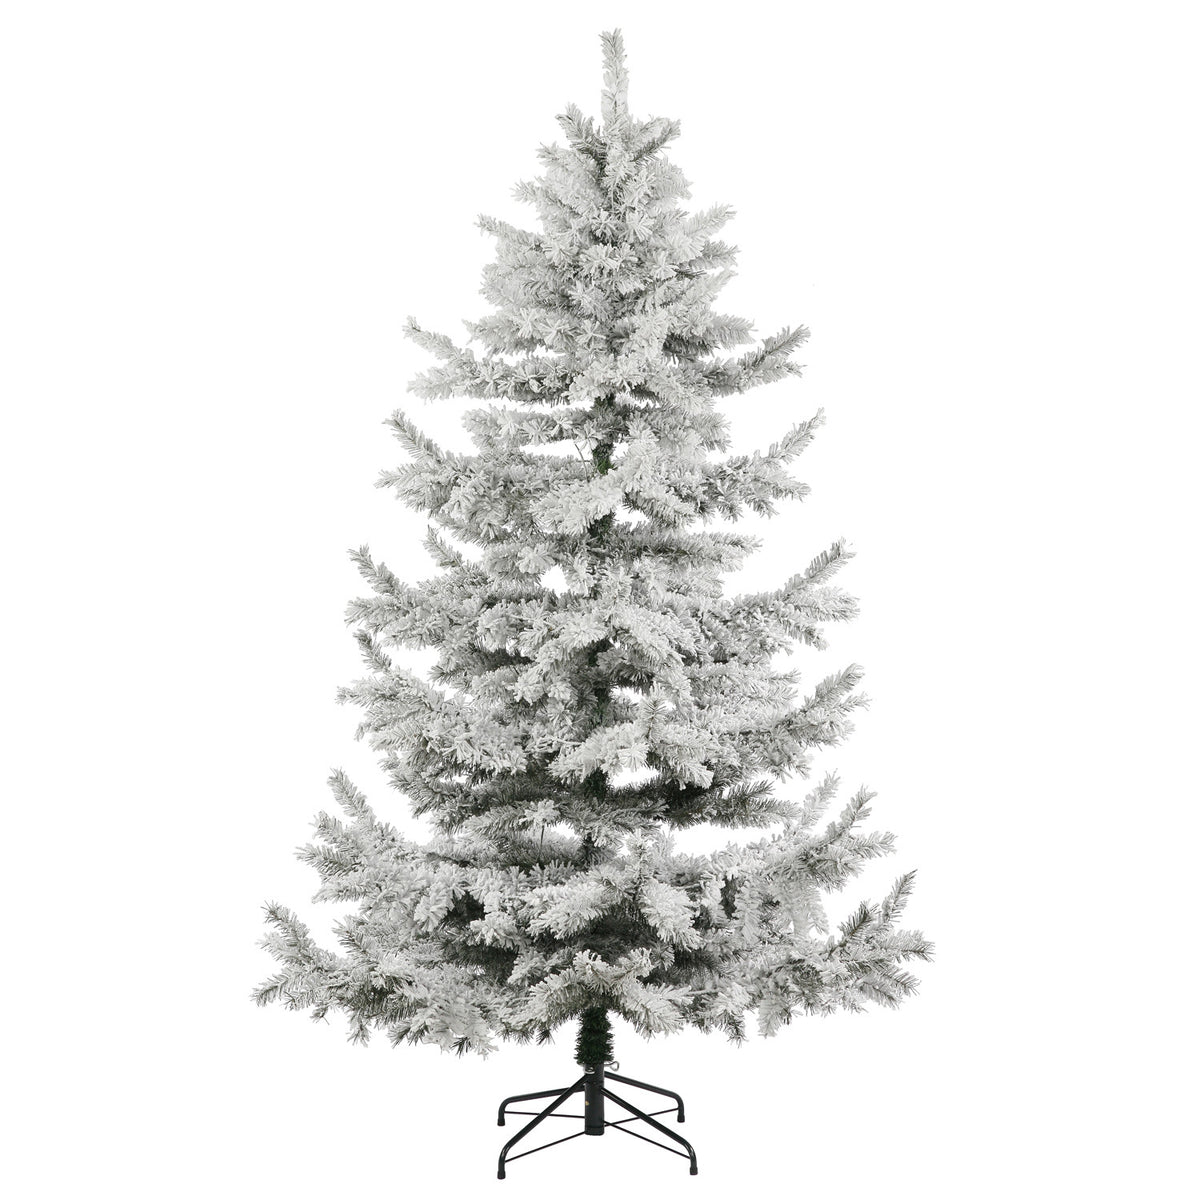 Artificial Snowy Christmas Tree Siberian Fir 7ft Flocked by Noma